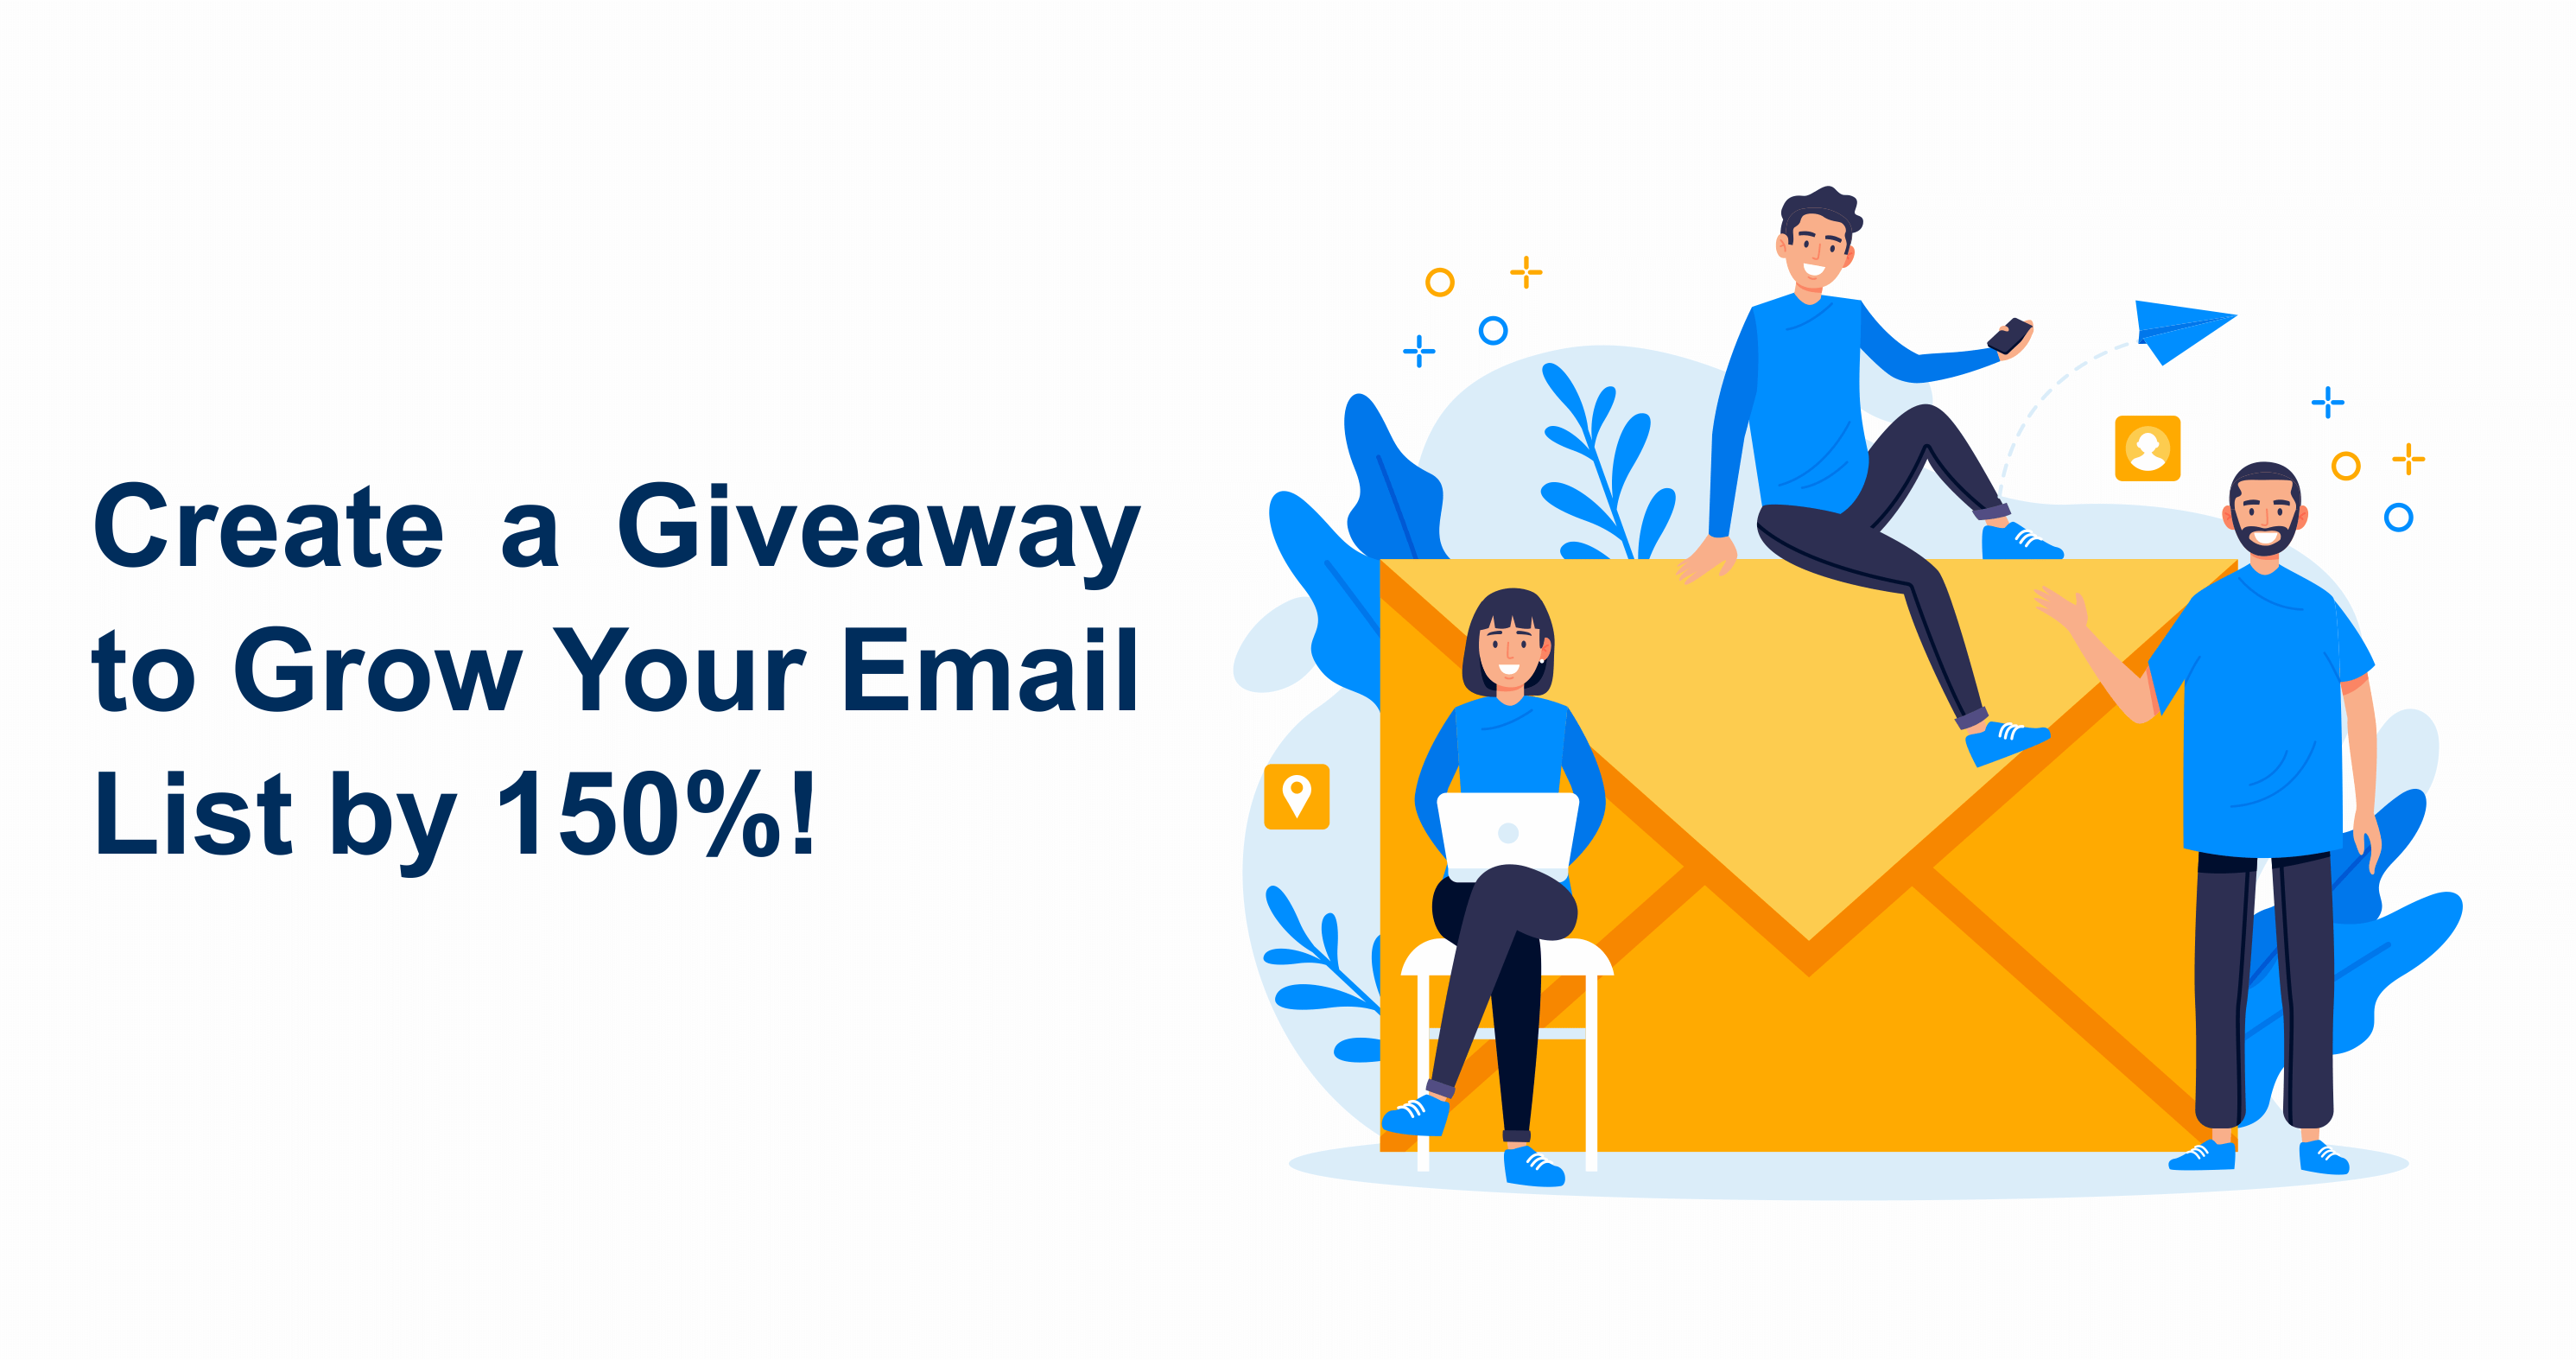 Steps to Create a Giveaway to Grow Your Email List by 150-!